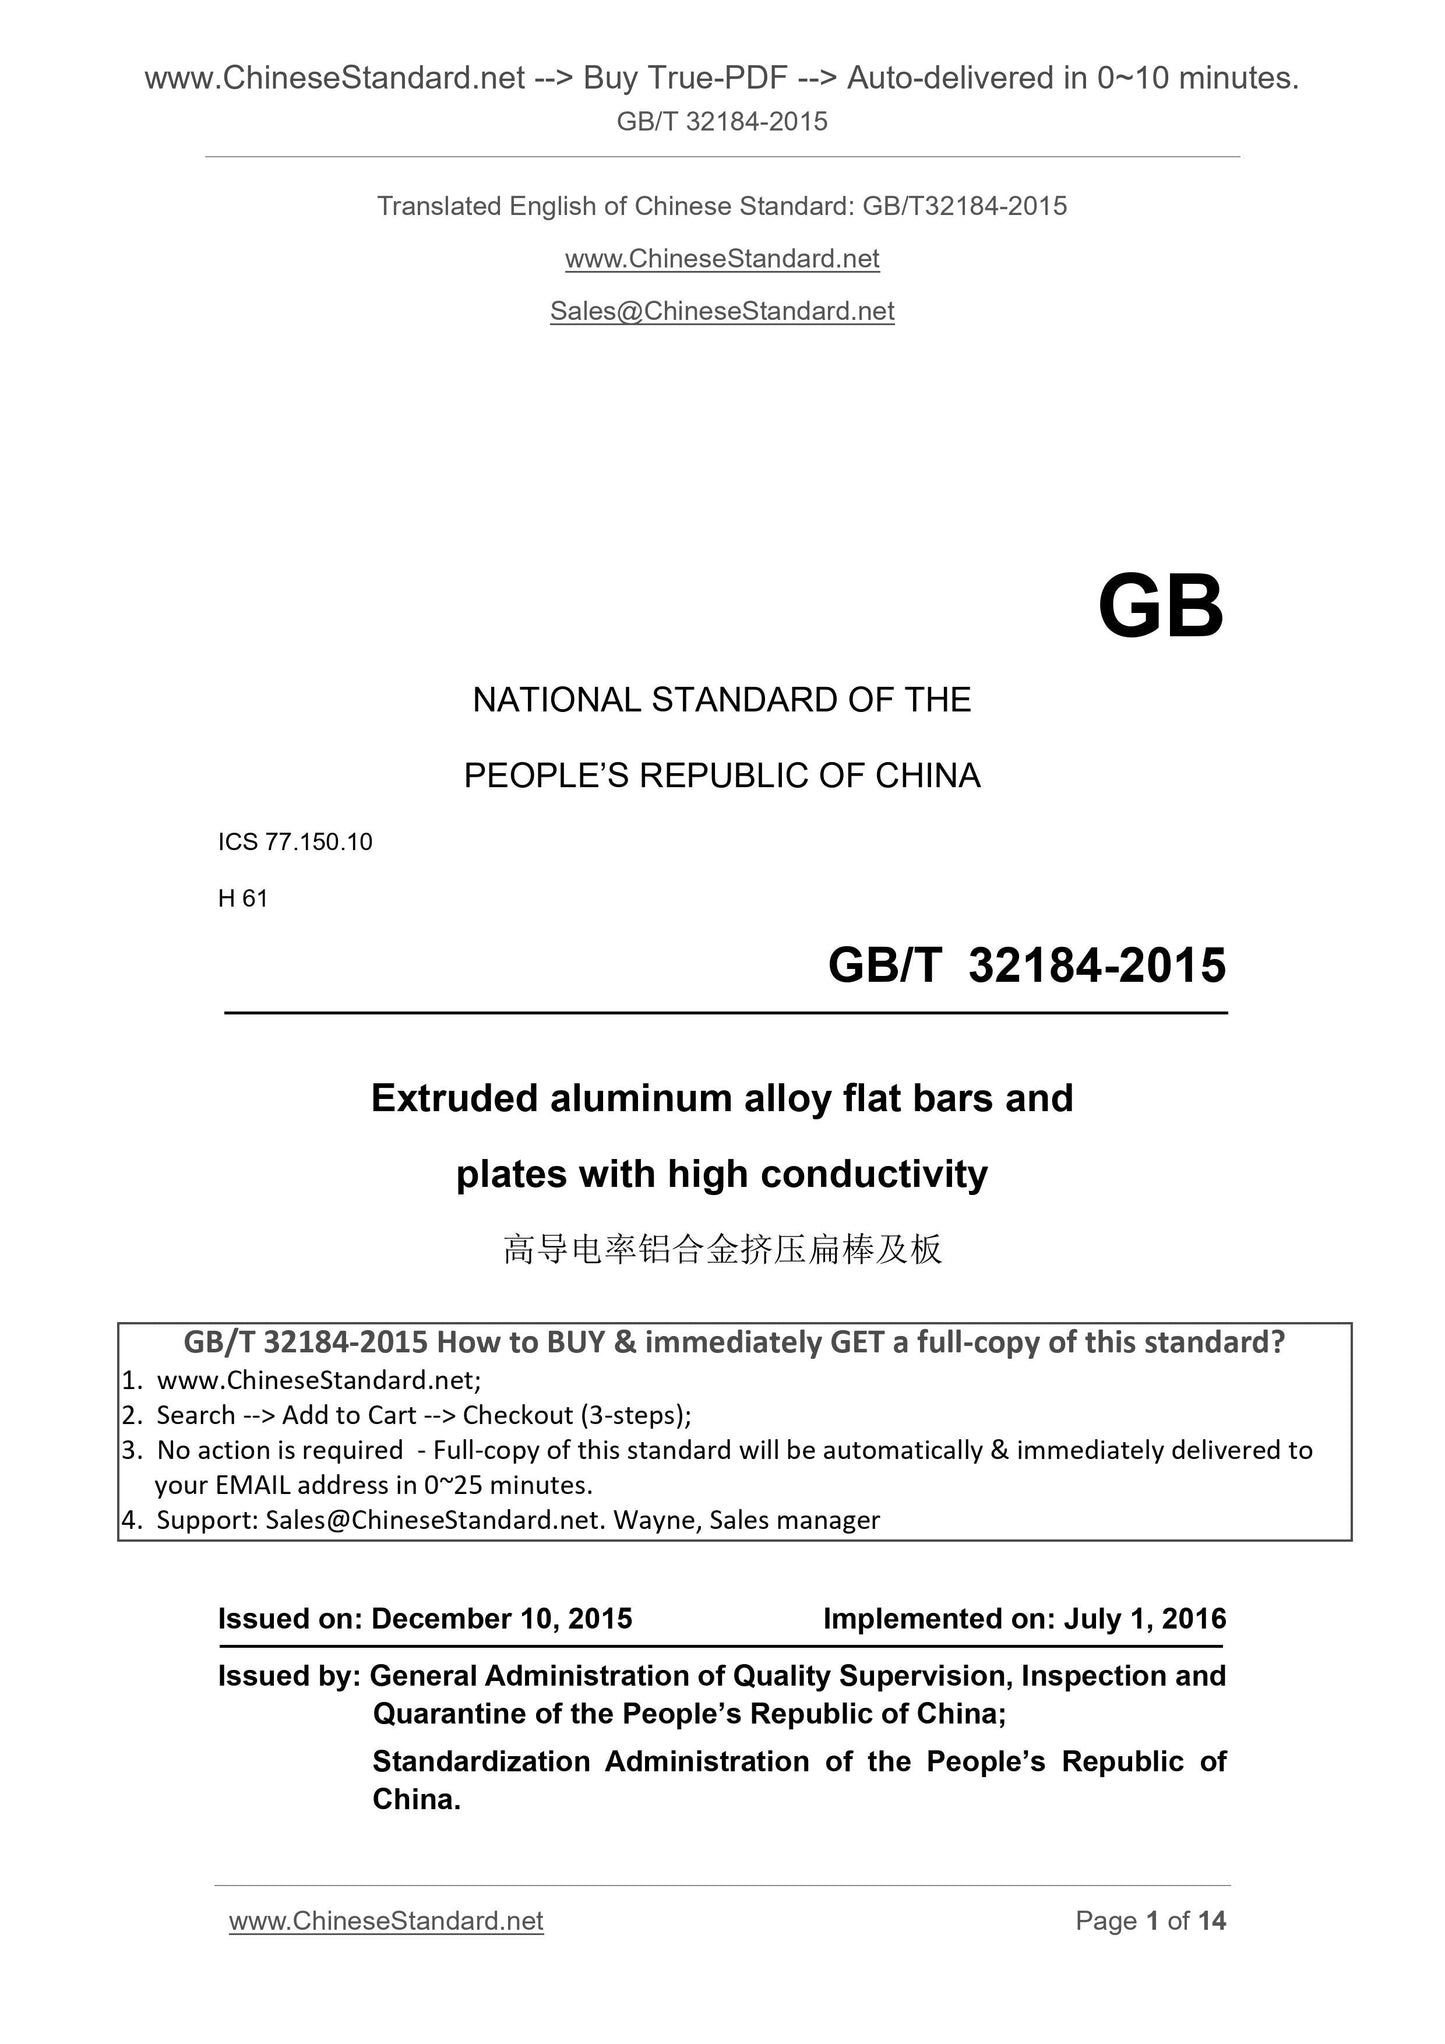 GB/T 32184-2015 Page 1